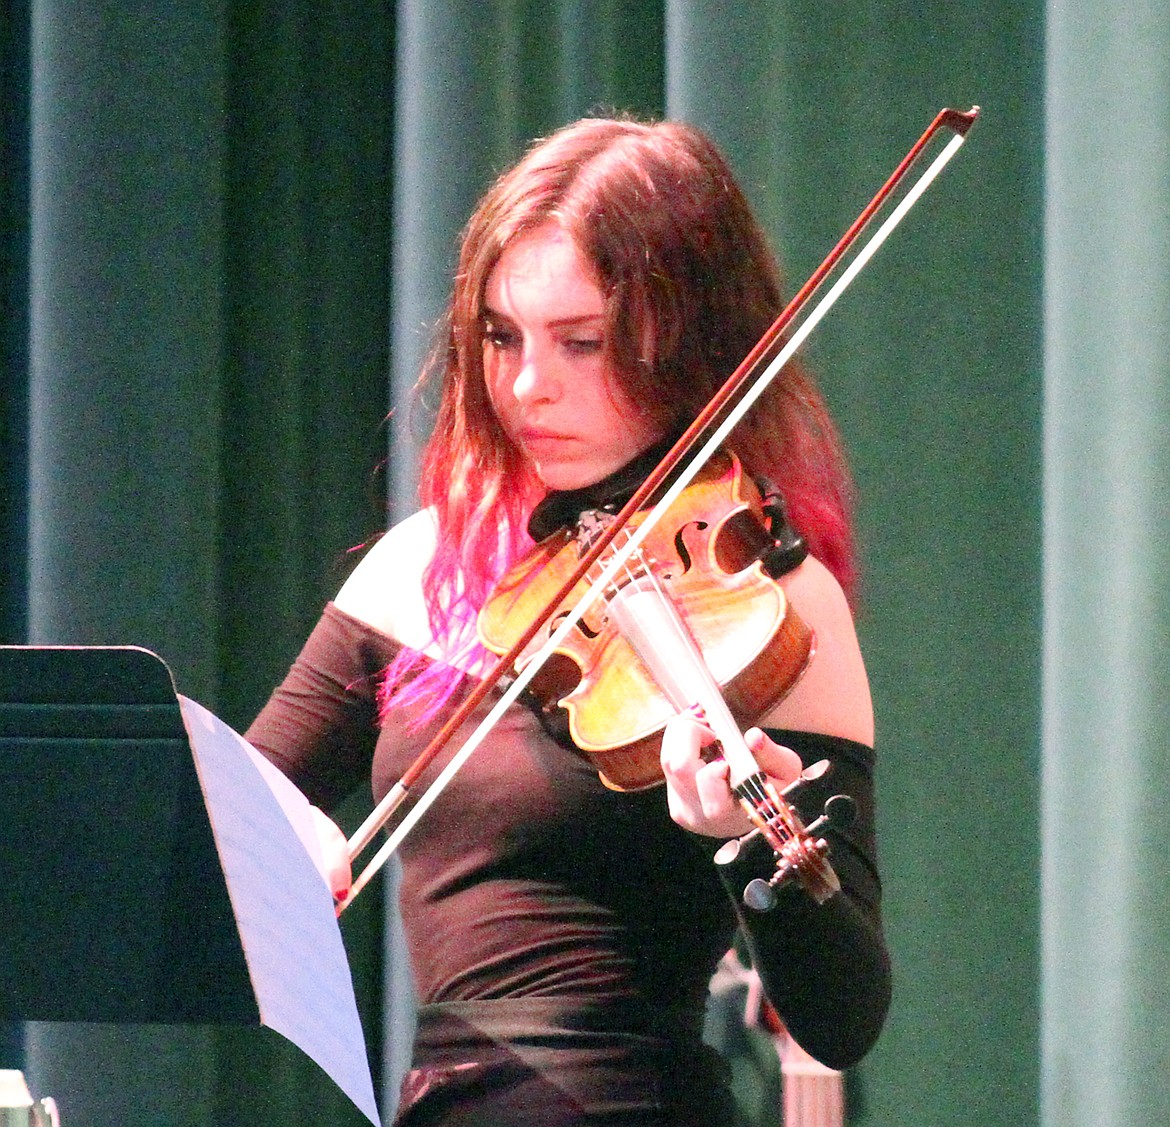 Last Monday&#146;s All Bands Pops Concert included Alyssa Bales&#146; performance of Concerto No.3 in G major by Fredrick Seitz.